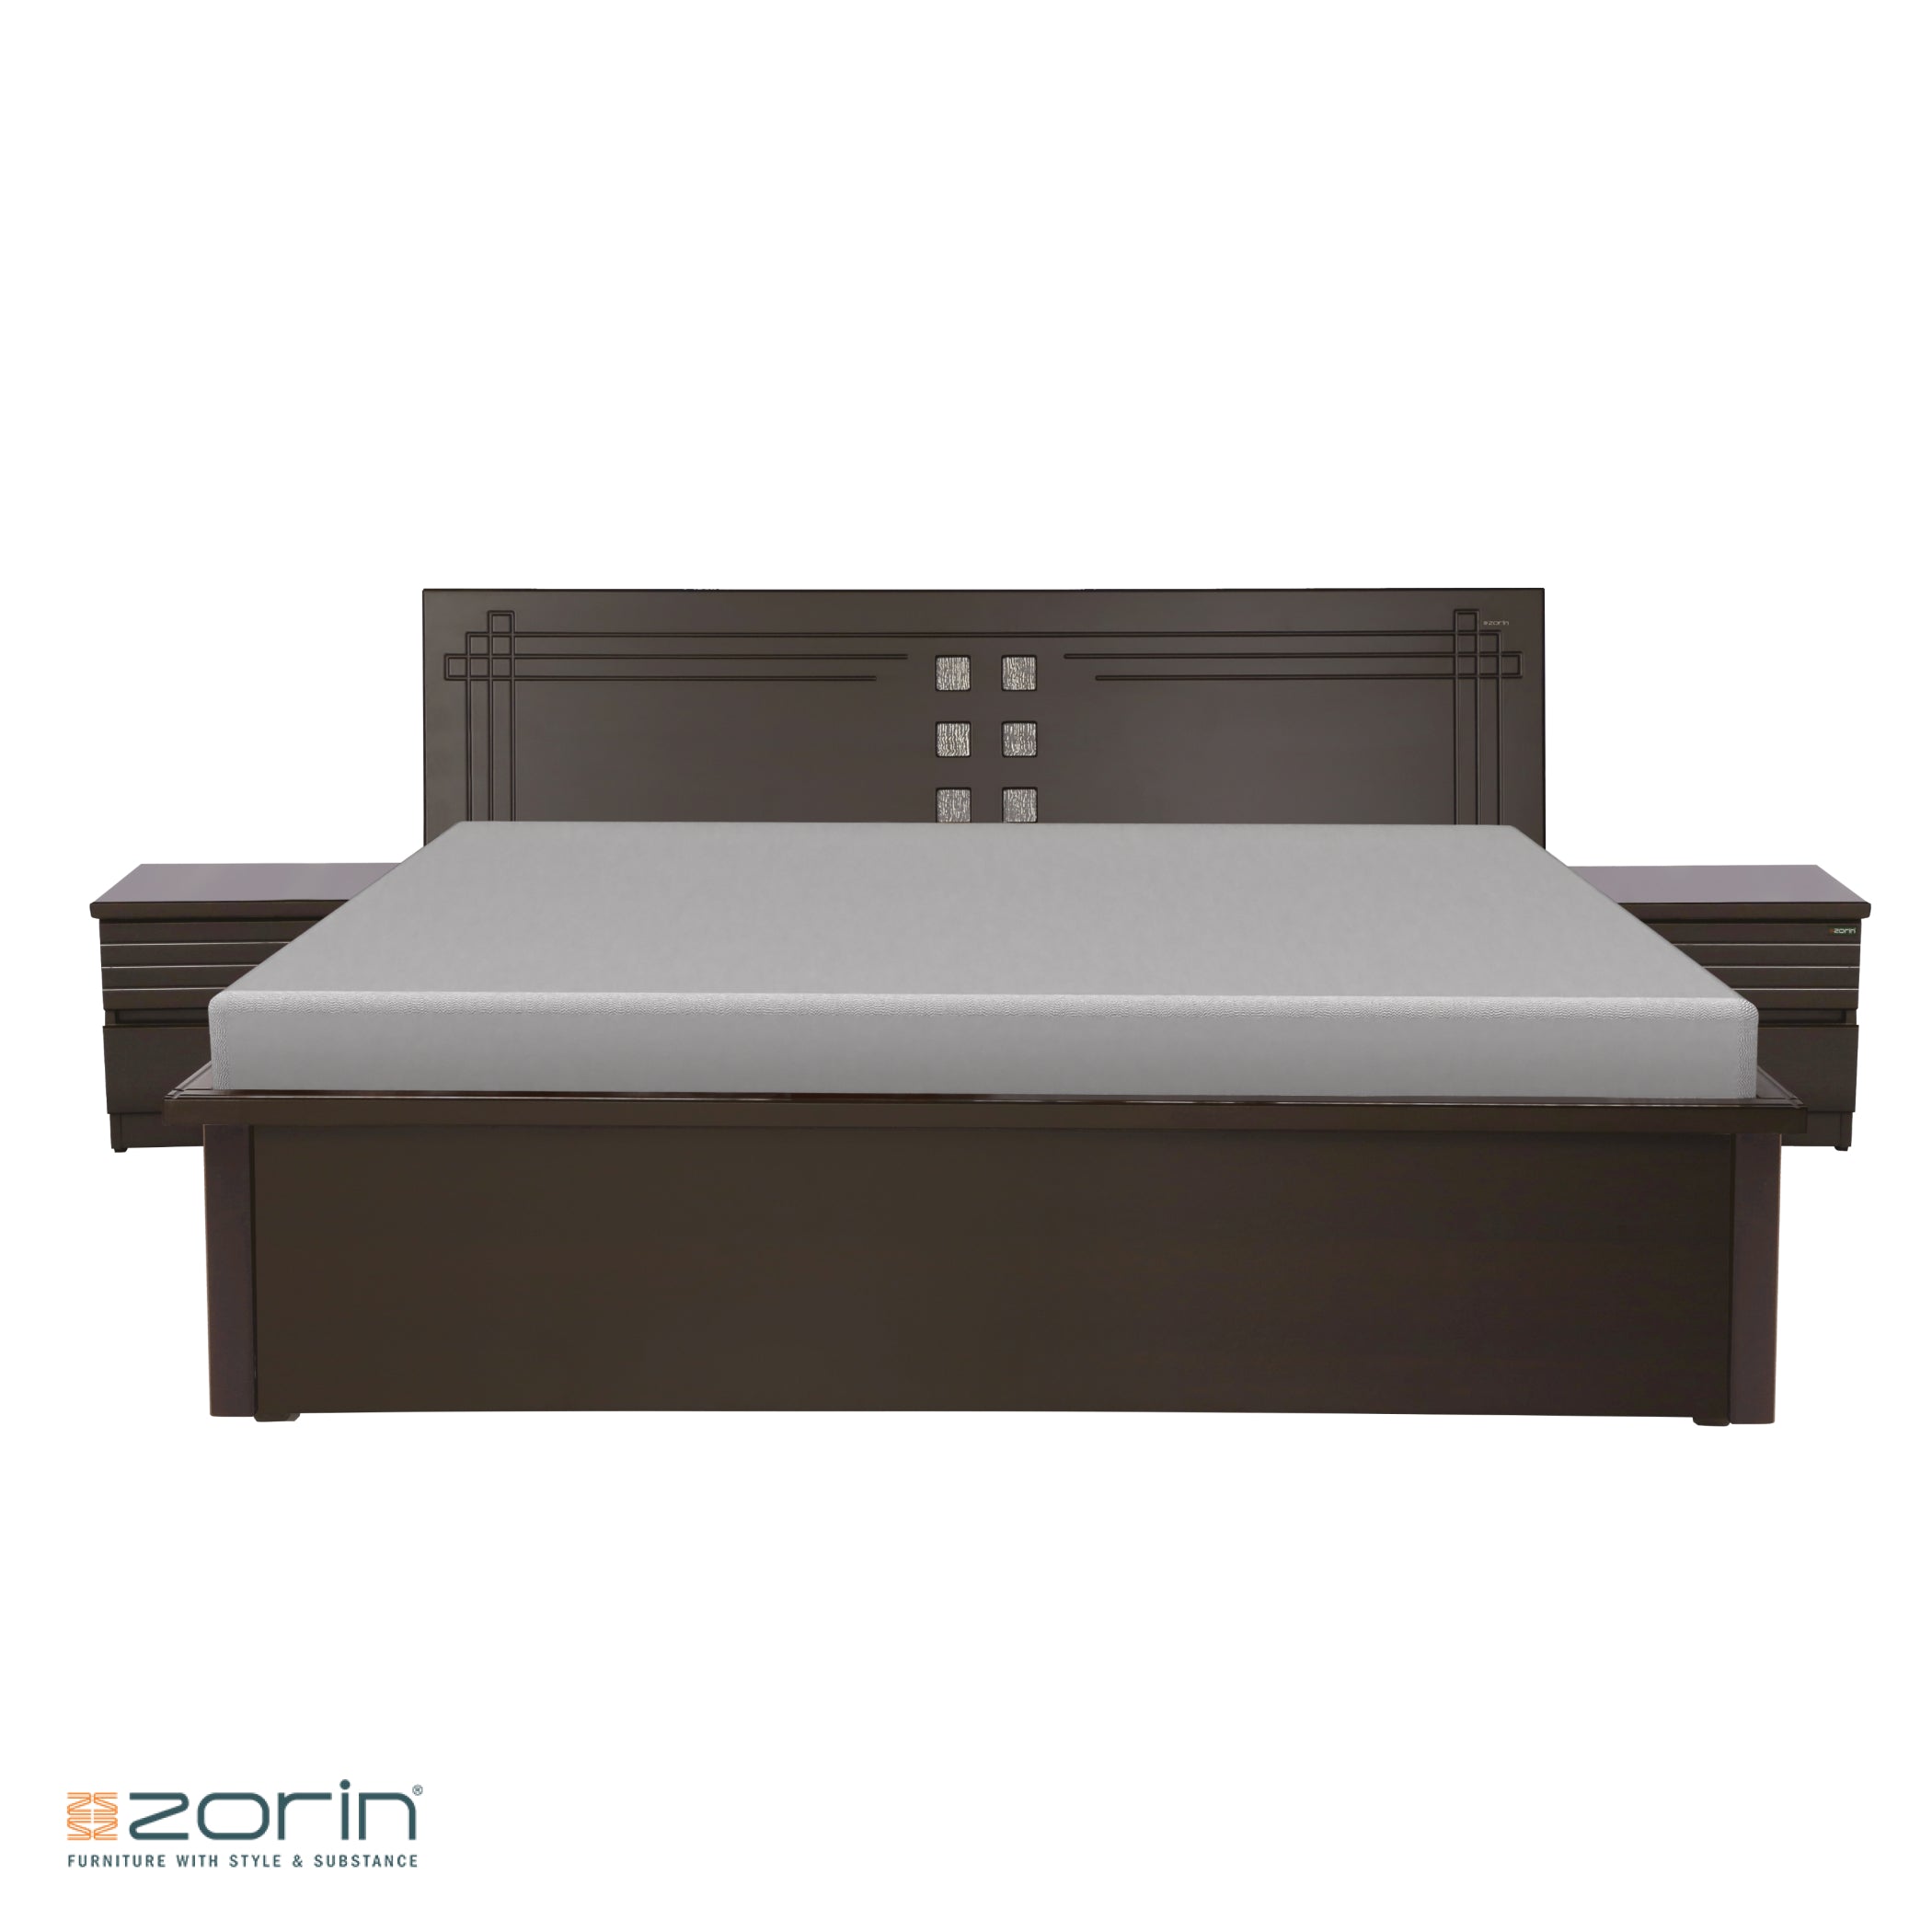 Front view Atlas bed in Walnut Finish